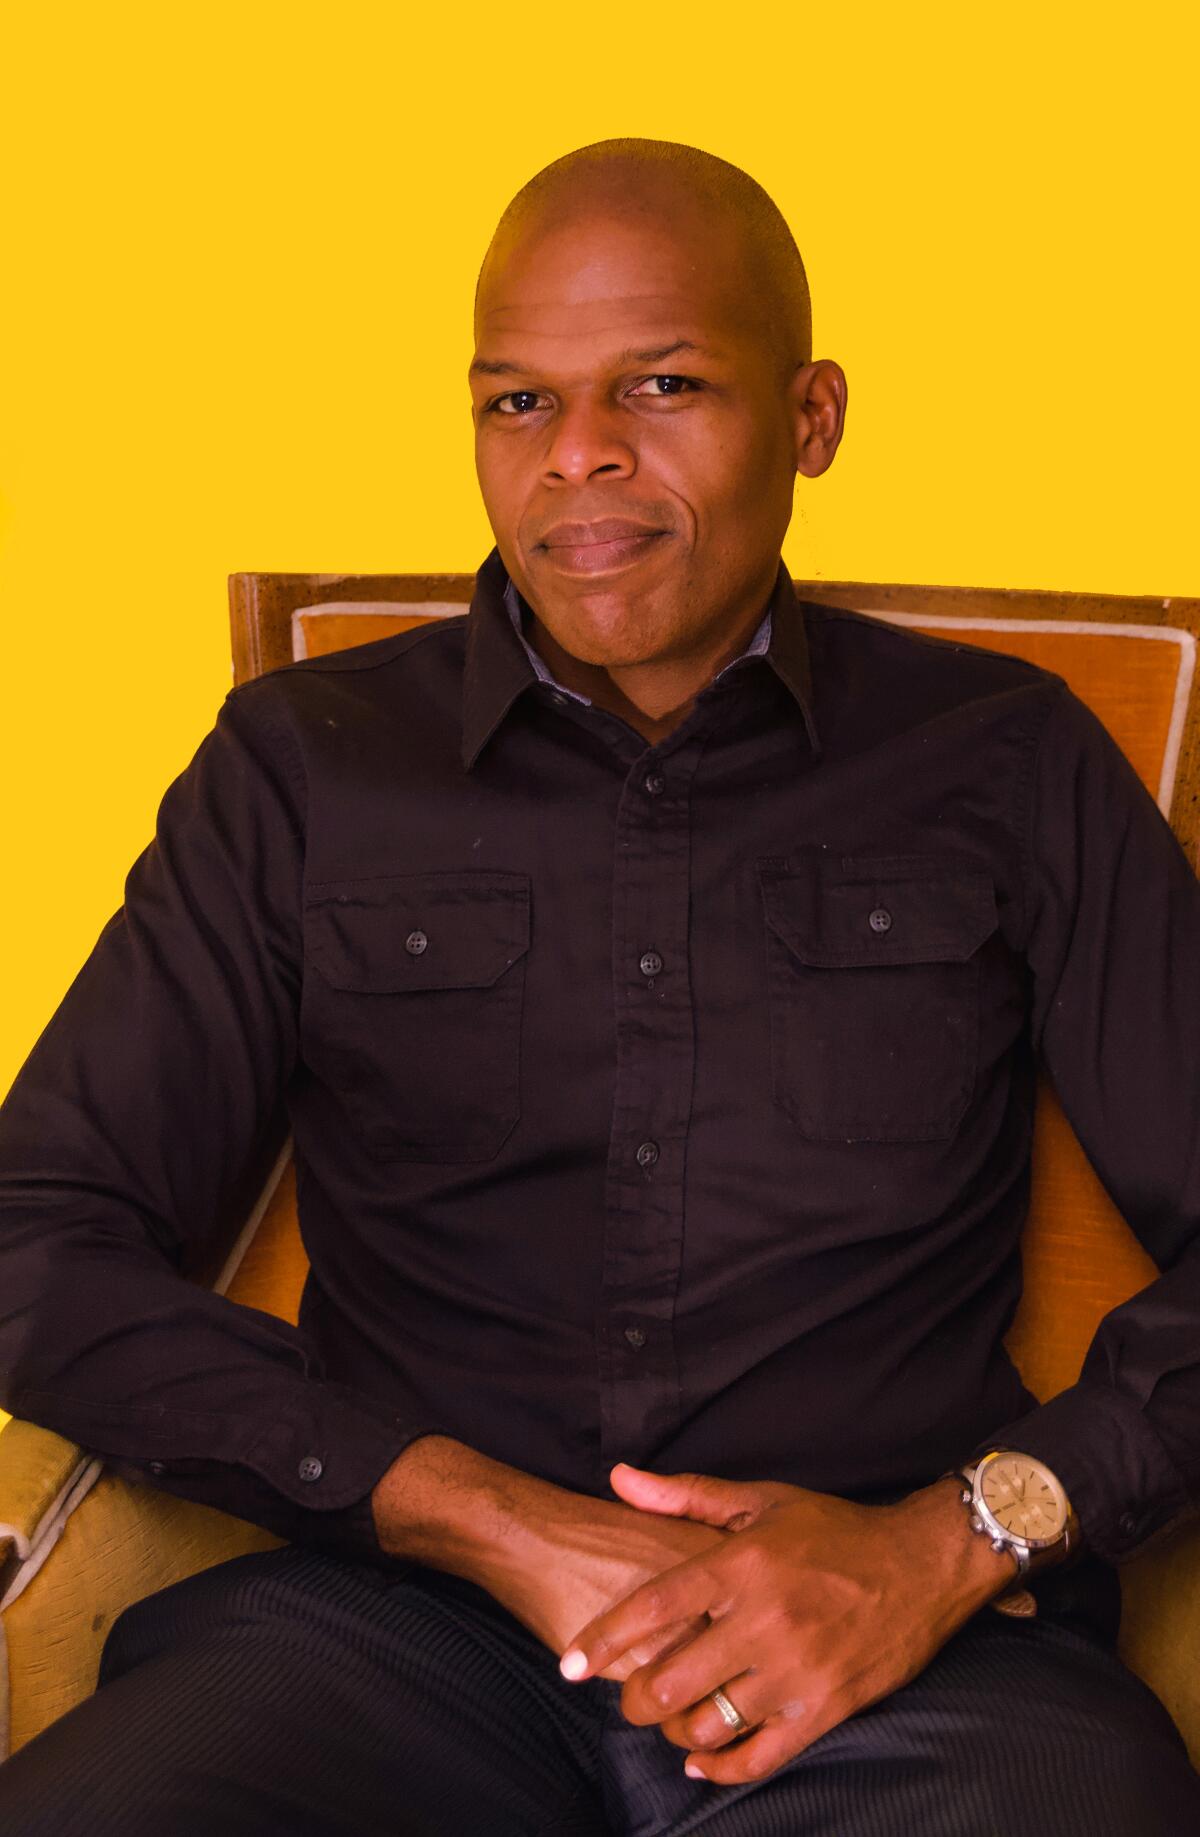 A Black man wearing all black sits in a brown chair in front of a yellow background